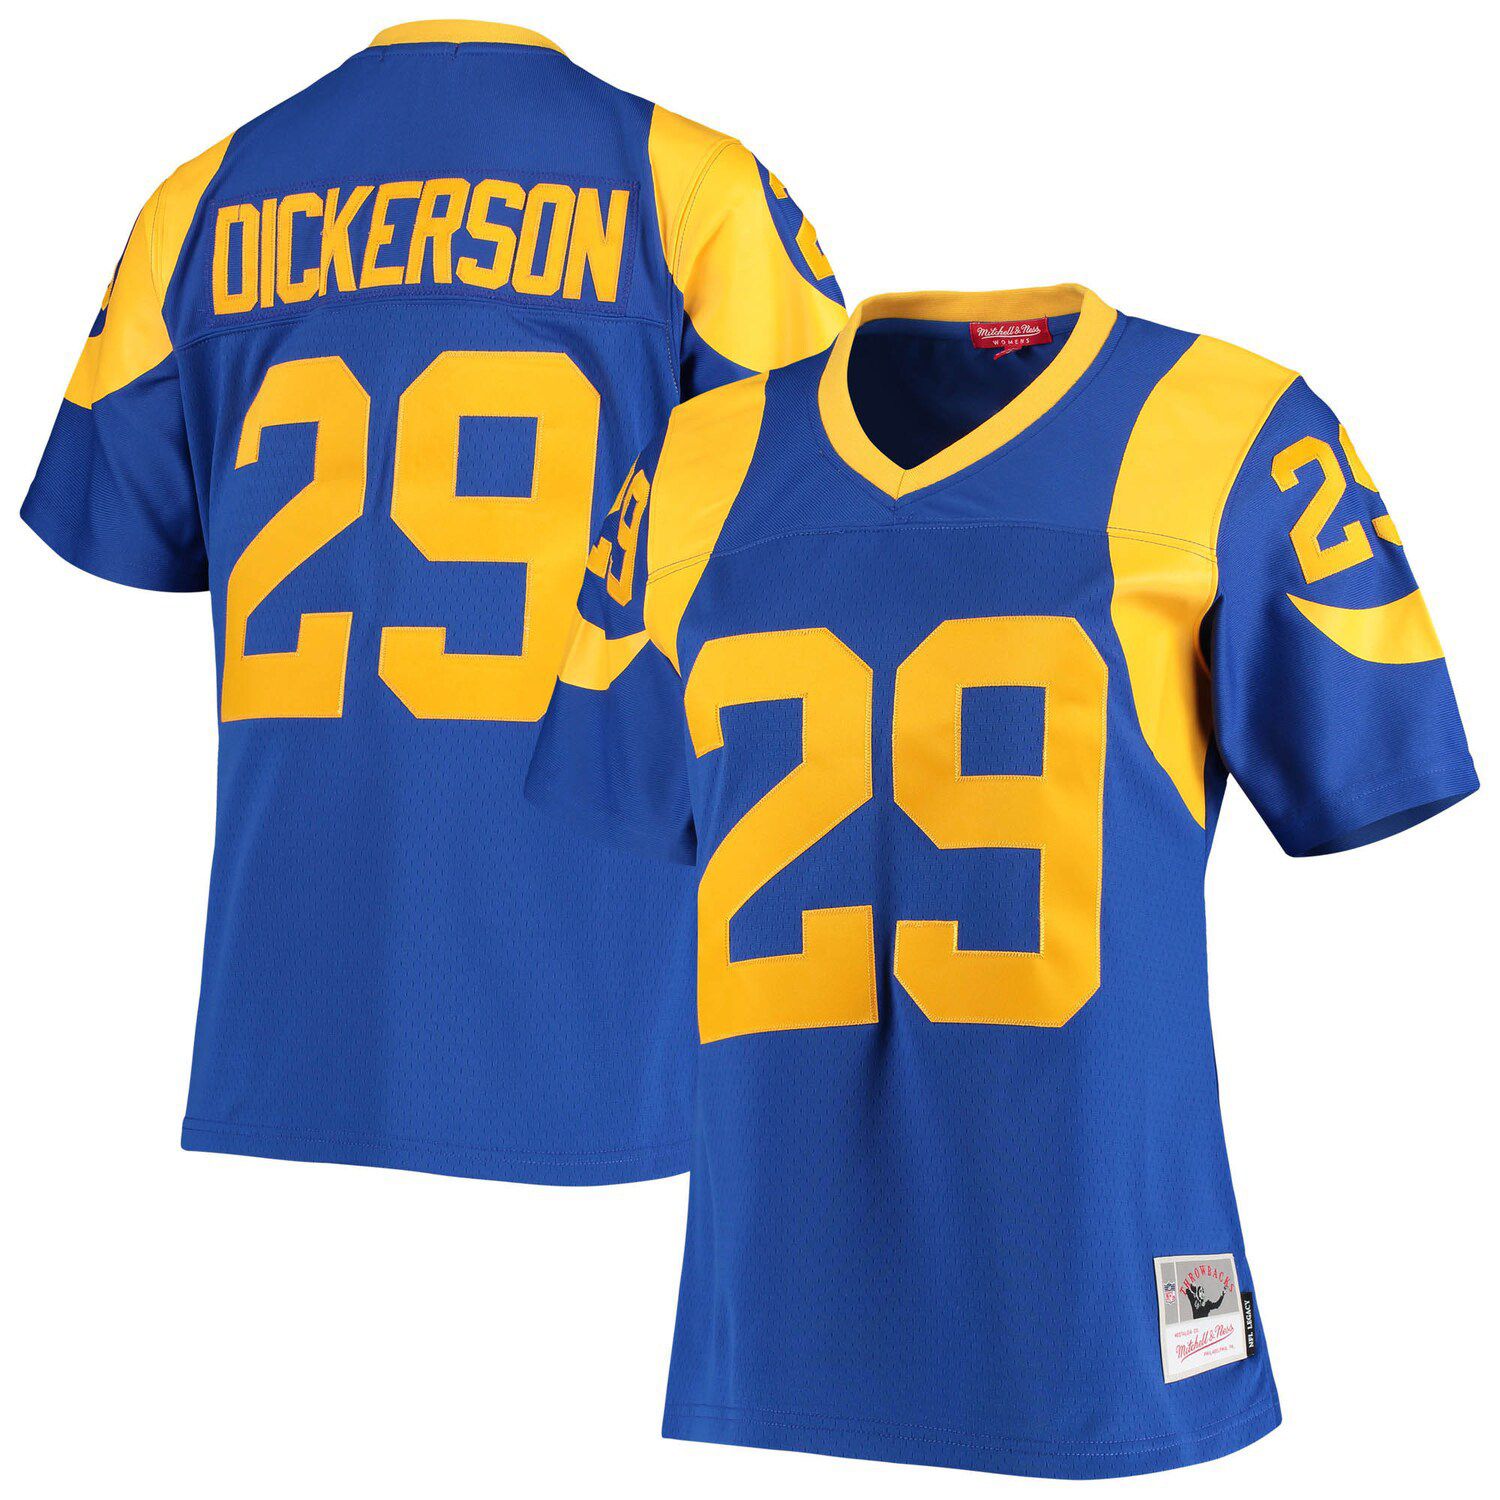 Men's Los Angeles Rams Eric Dickerson Nike Royal Game Retired